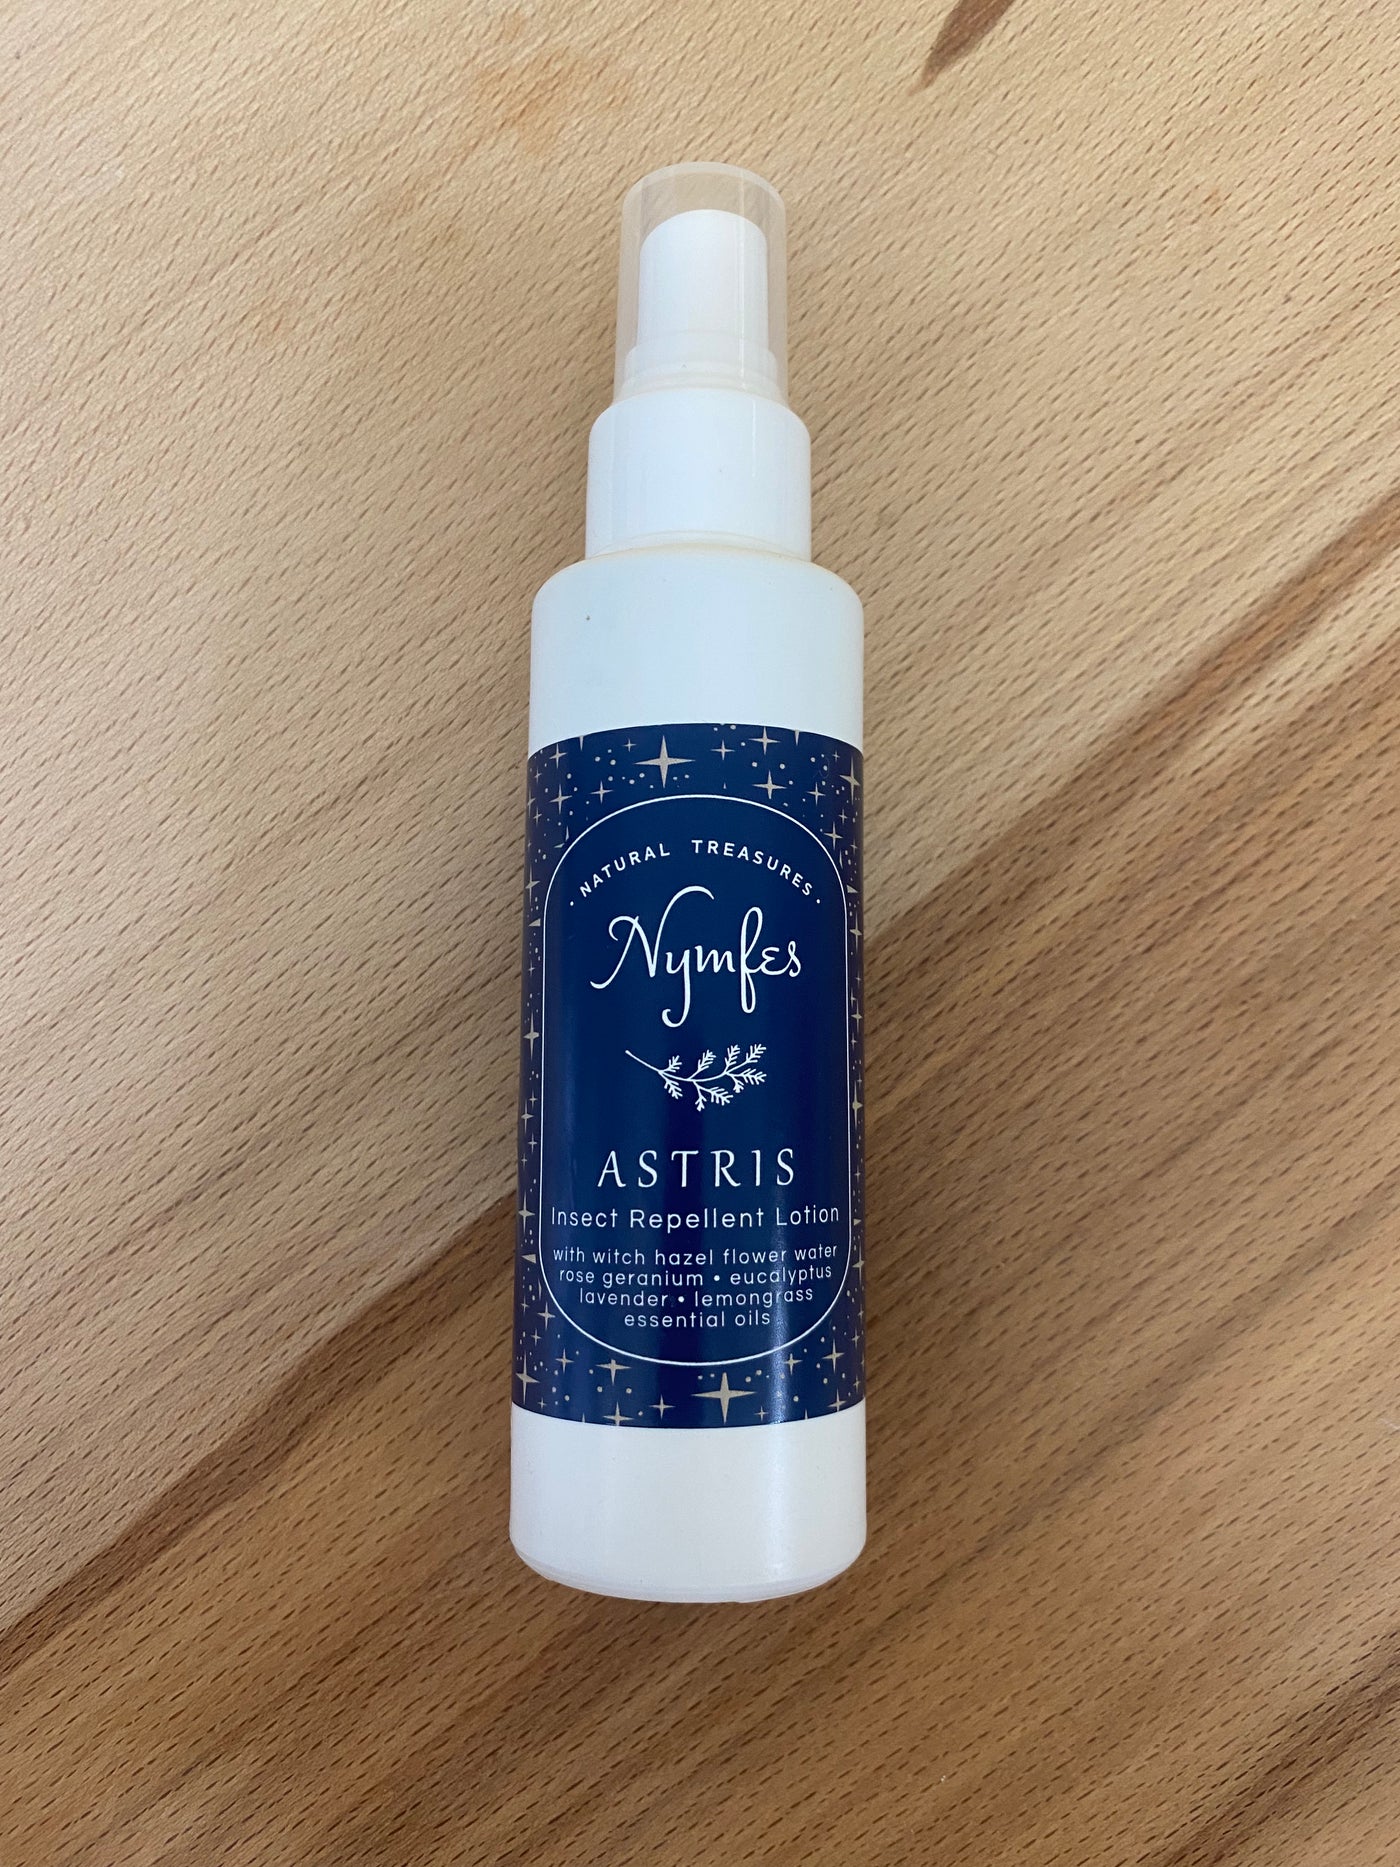 Nymfes Insect Repellent Lotion Astris